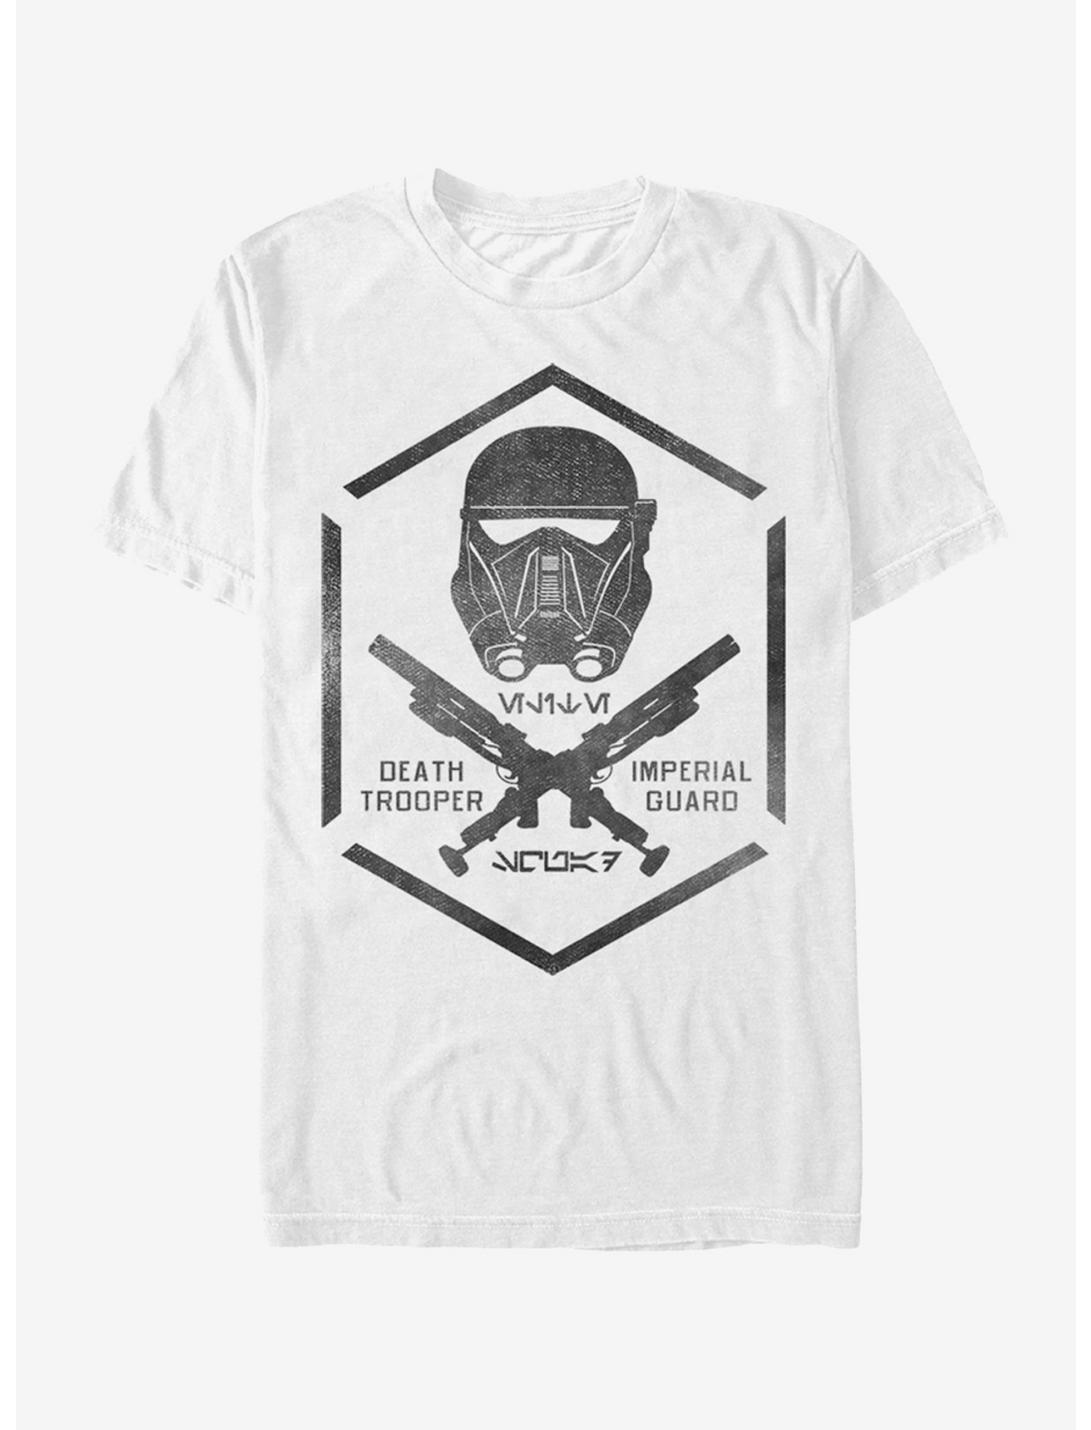 Star Wars Death Trooper Imperial Guard T-Shirt, WHITE, hi-res